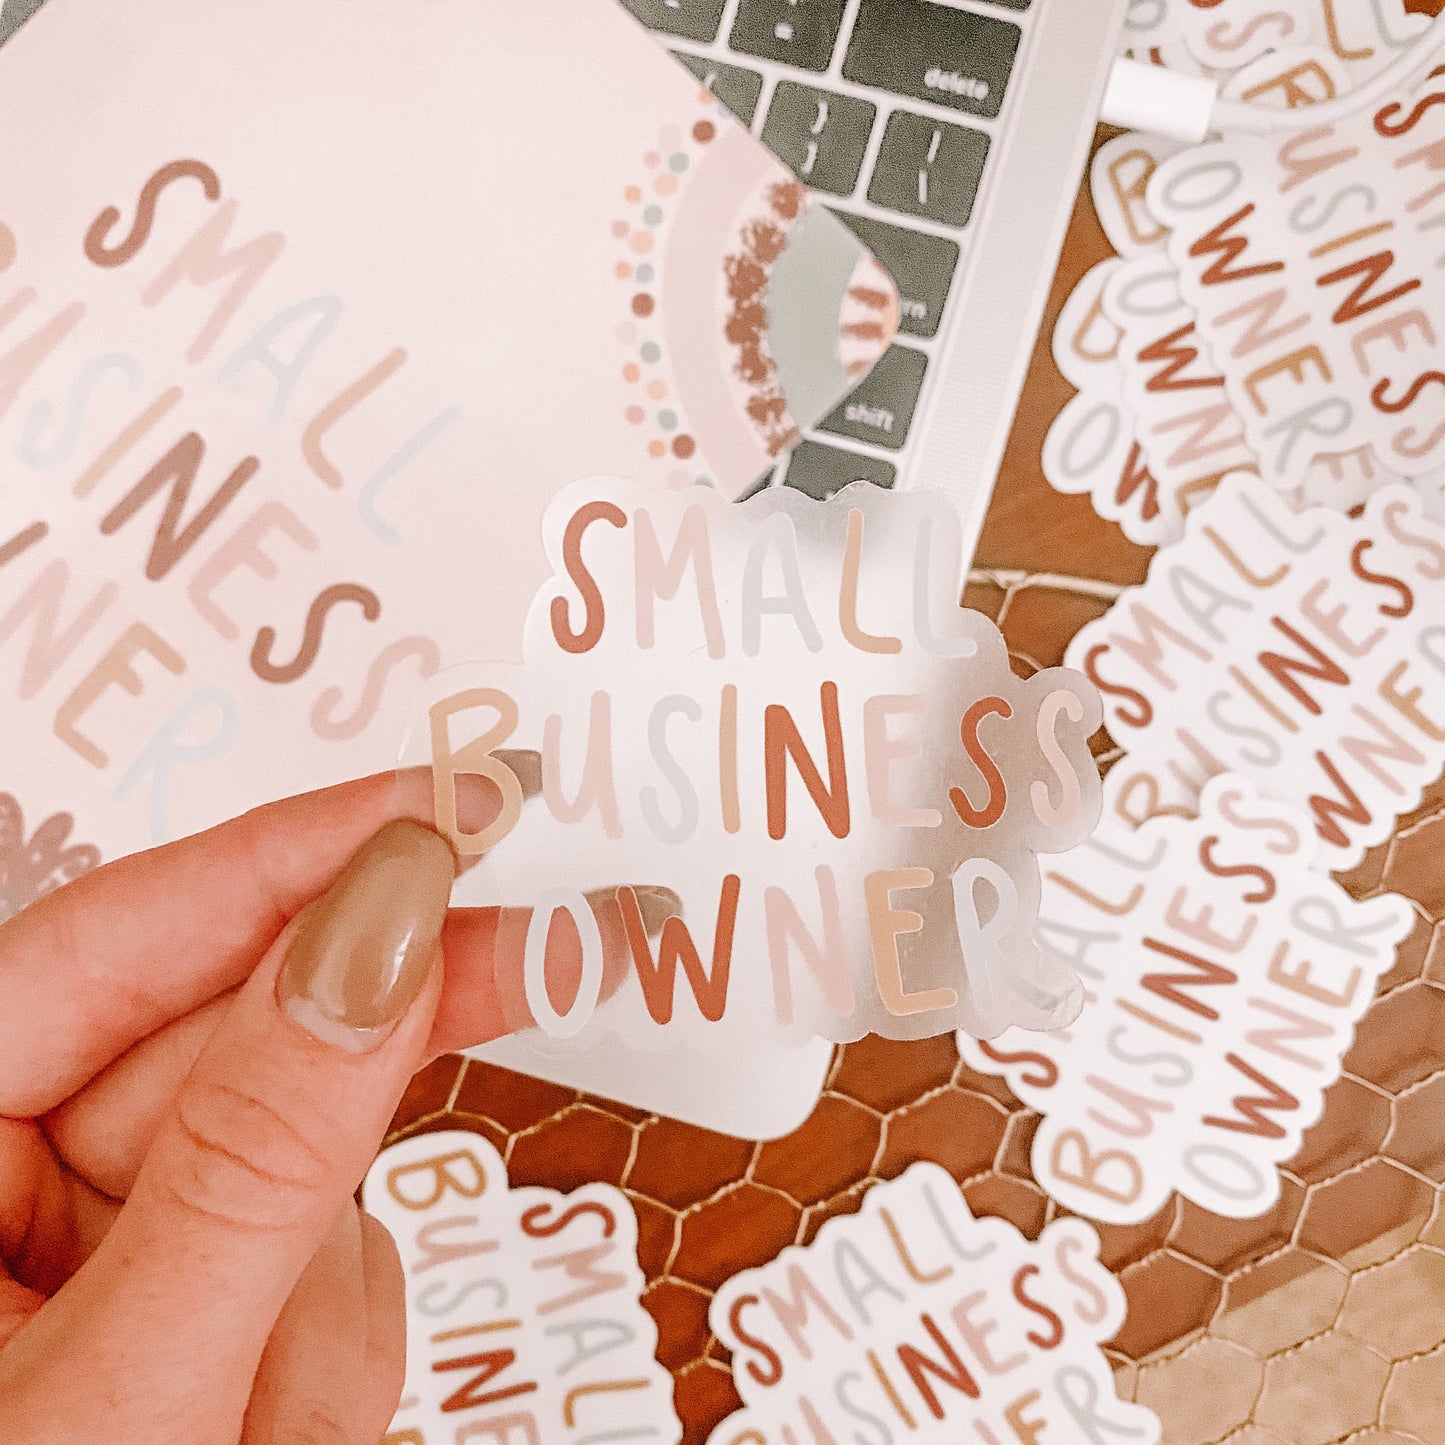 CLEAR Signature Small Business Owner Waterproof Vinyl Sticker